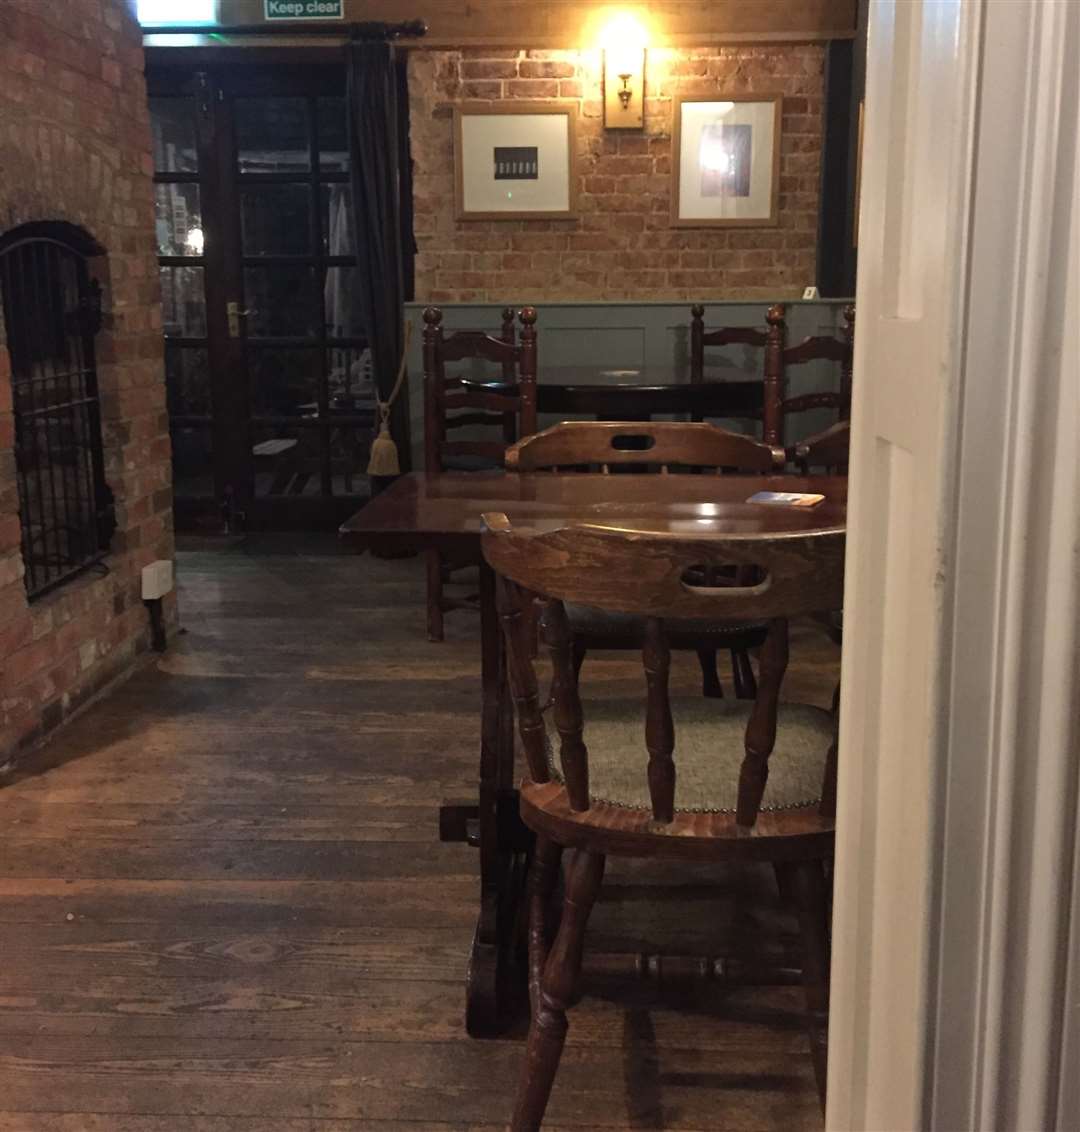 Stripped floorboards, natural brick and sensible furniture – the pub is well maintained and cared for